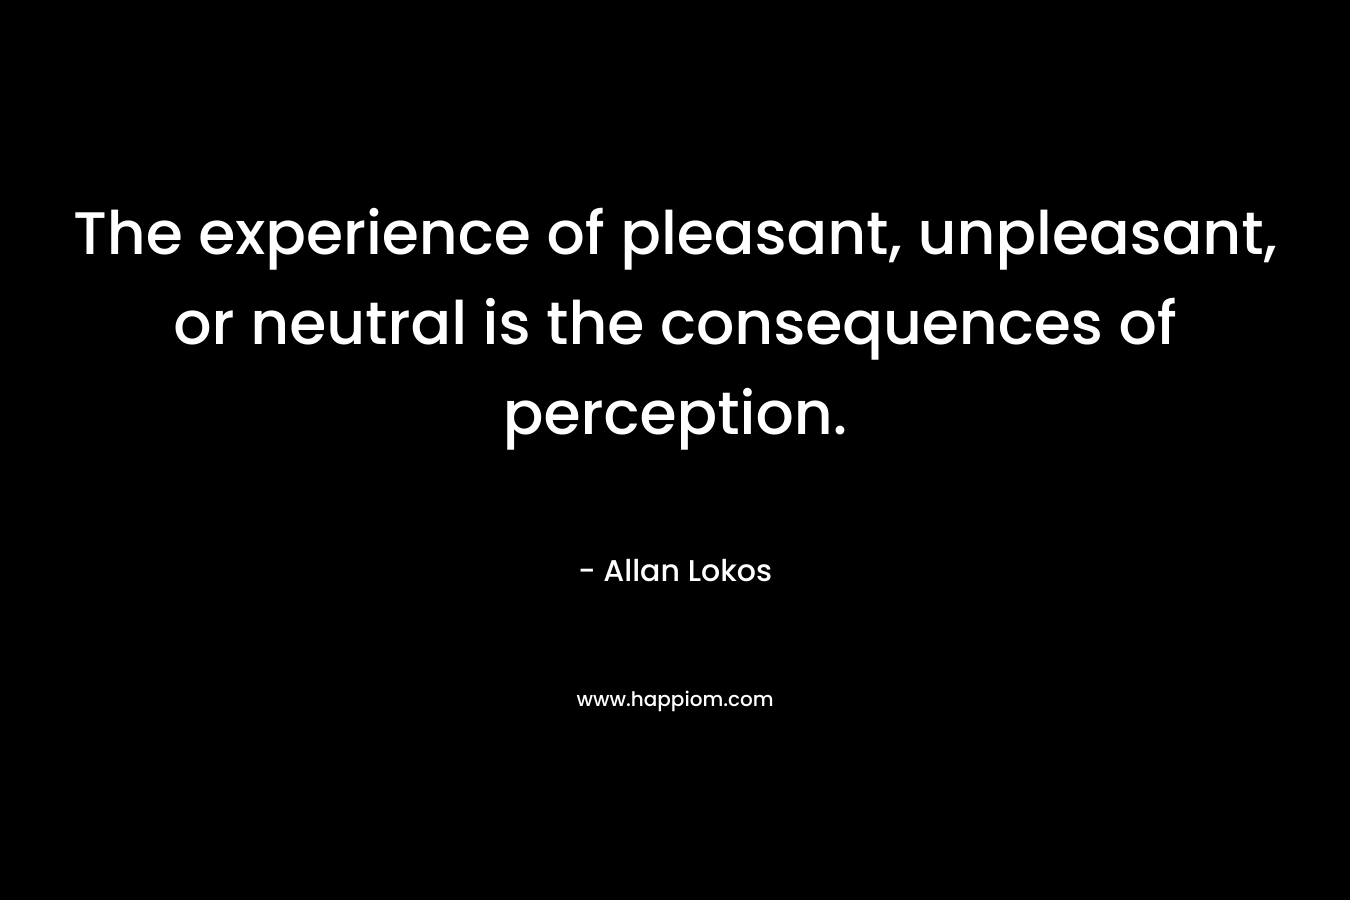 The experience of pleasant, unpleasant, or neutral is the consequences of perception.